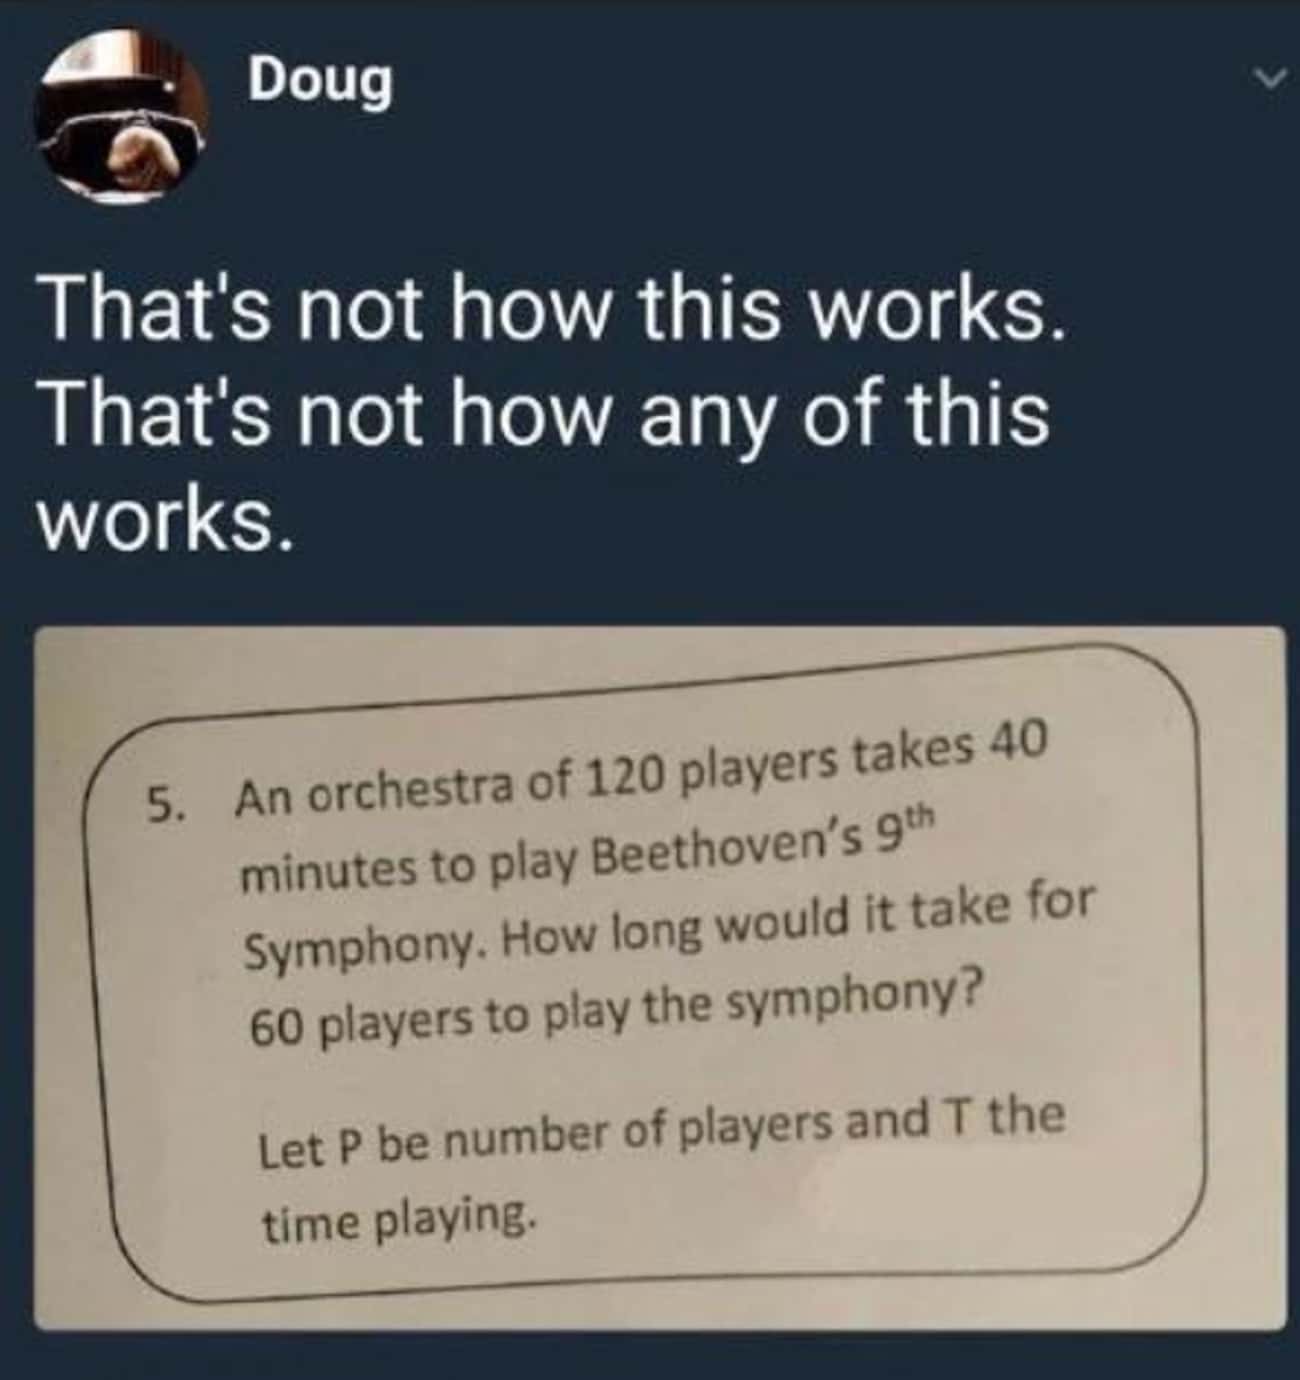 A More Efficient Orchestra